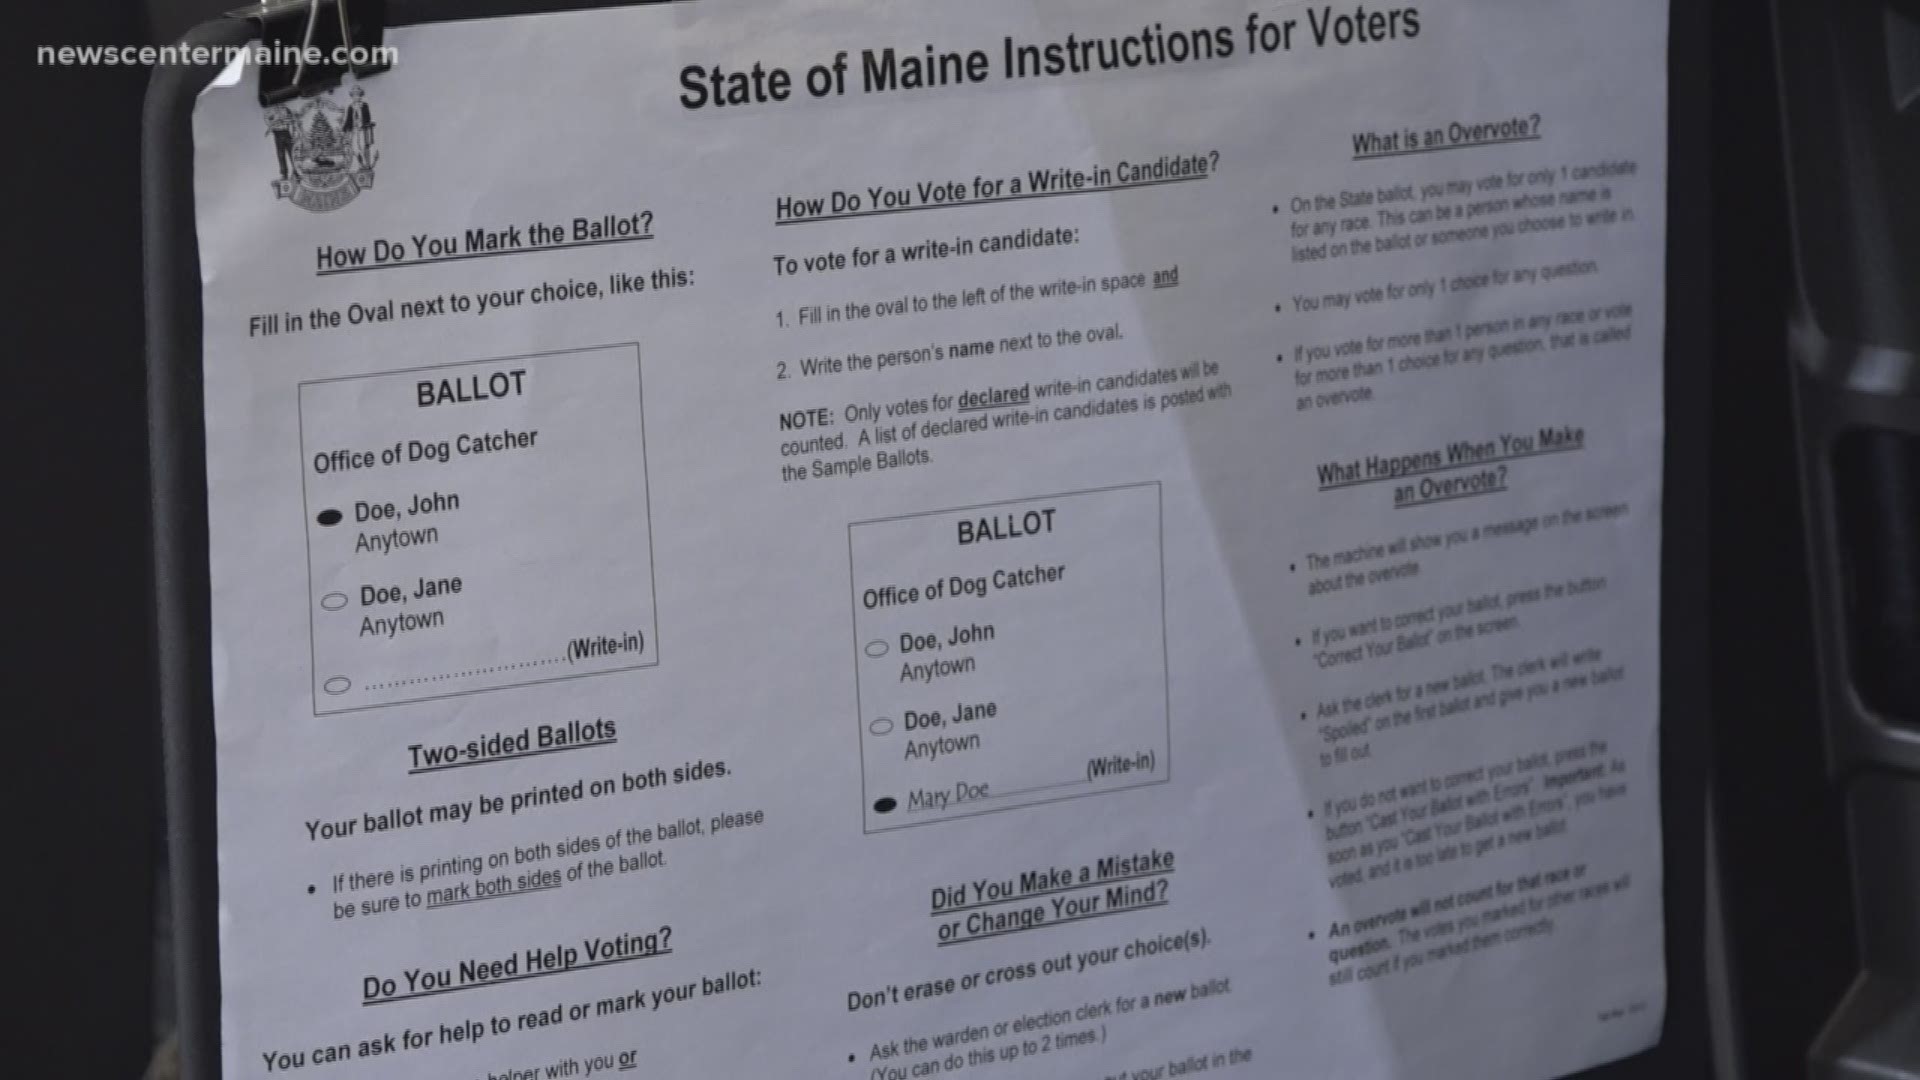 Next Tuesday, voters in Bangor and parts of Orono will choose a new representative for Maine's House.